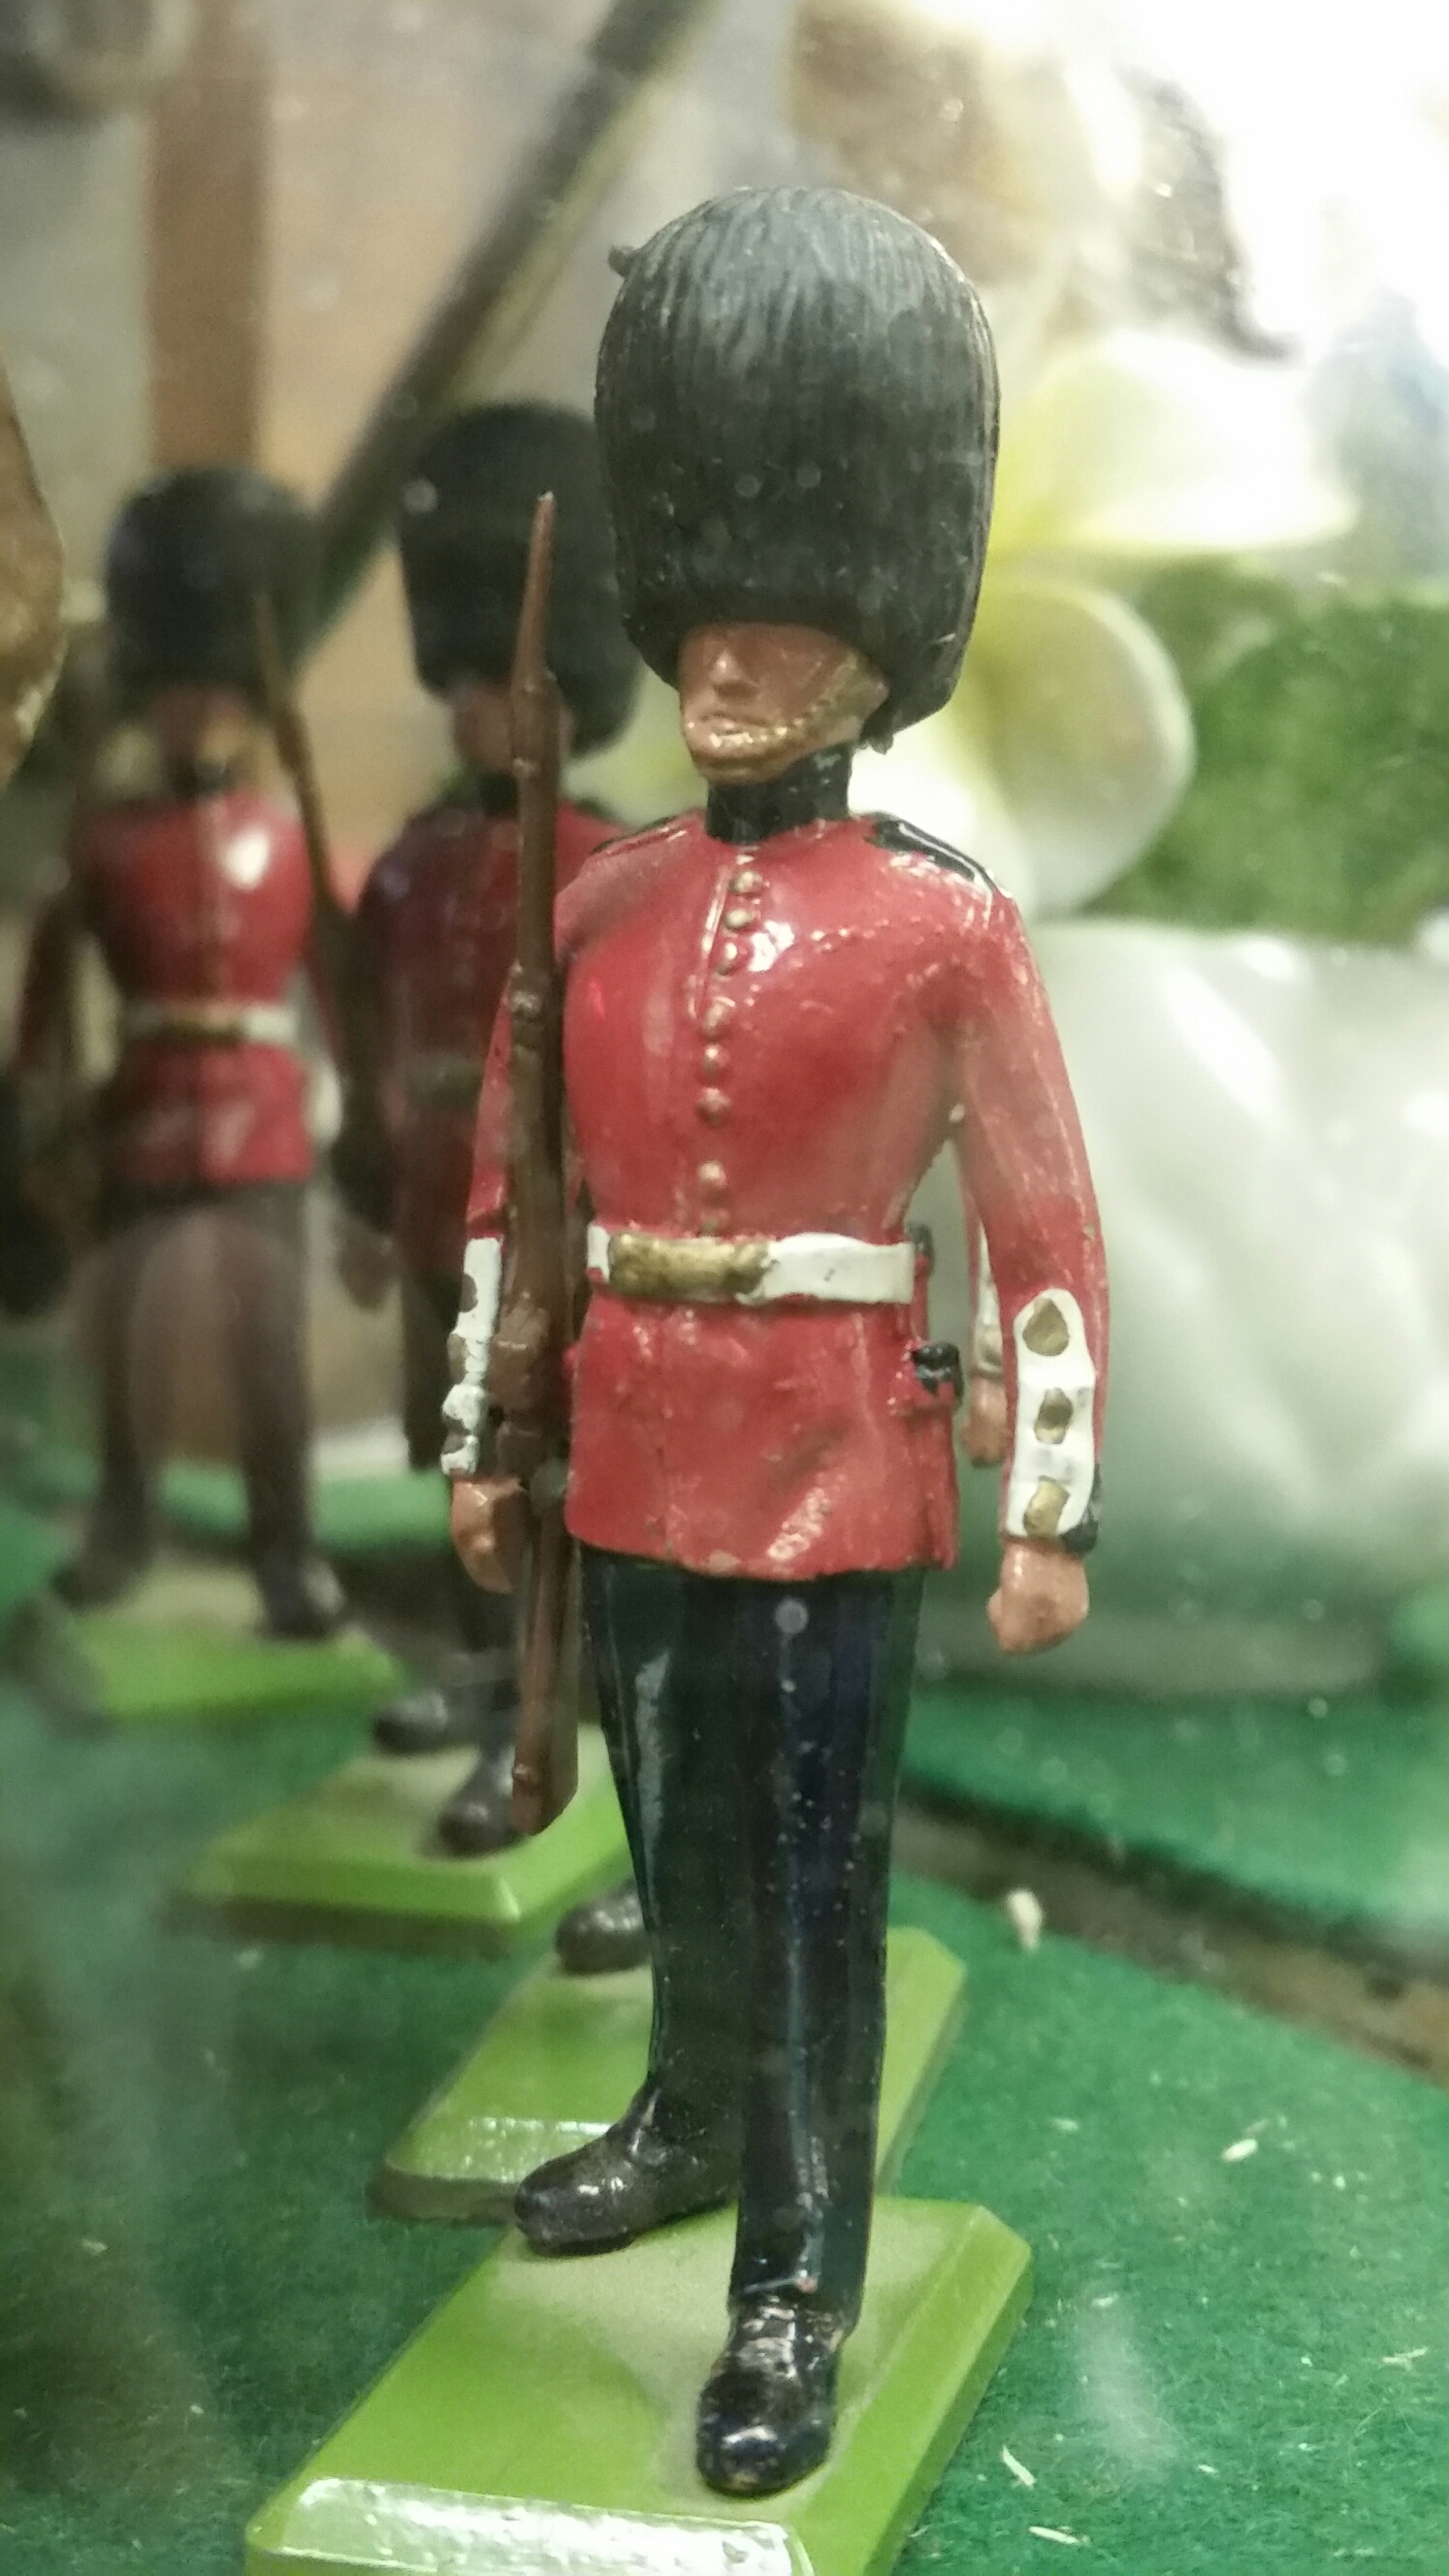 Details about   Vintage Metal Toy Soldier playing Bugle made in England 